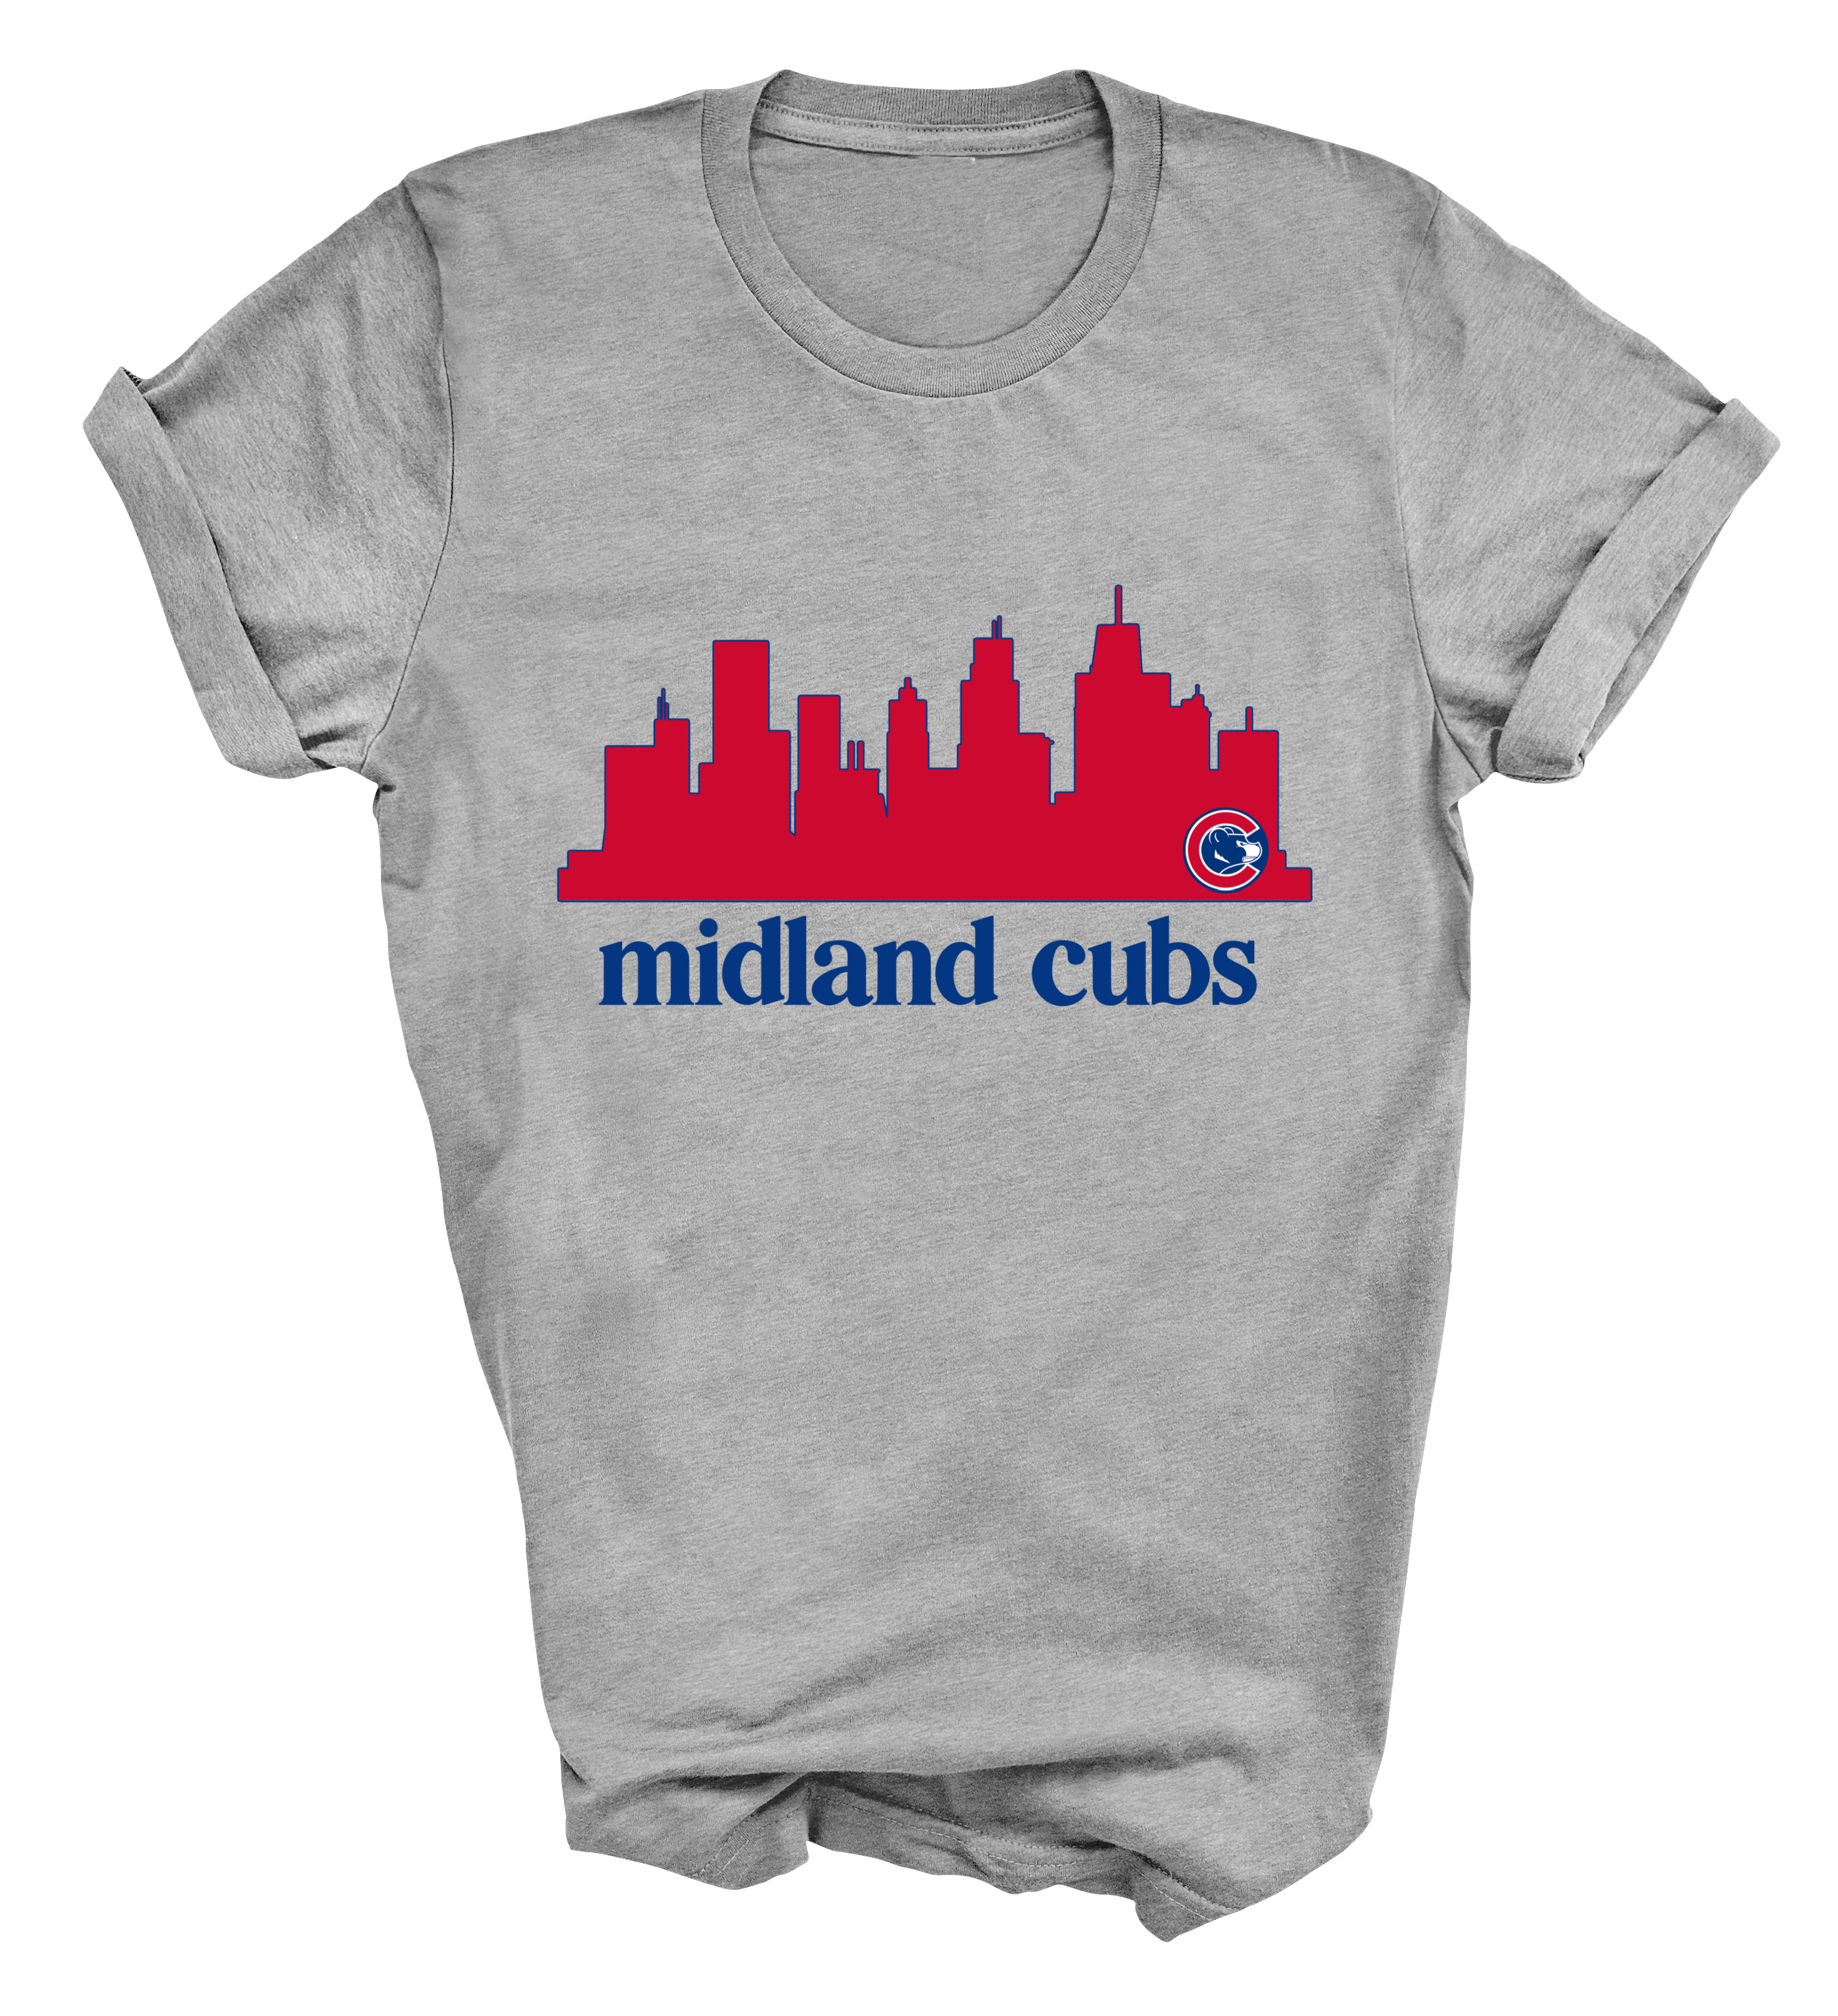 Pink Mustache Boutique Bella Canvas or Comfort Colors Midland Cubs Shirt in Script/ Youth or Adult Sizes Adult 3XL / Bella Canvas